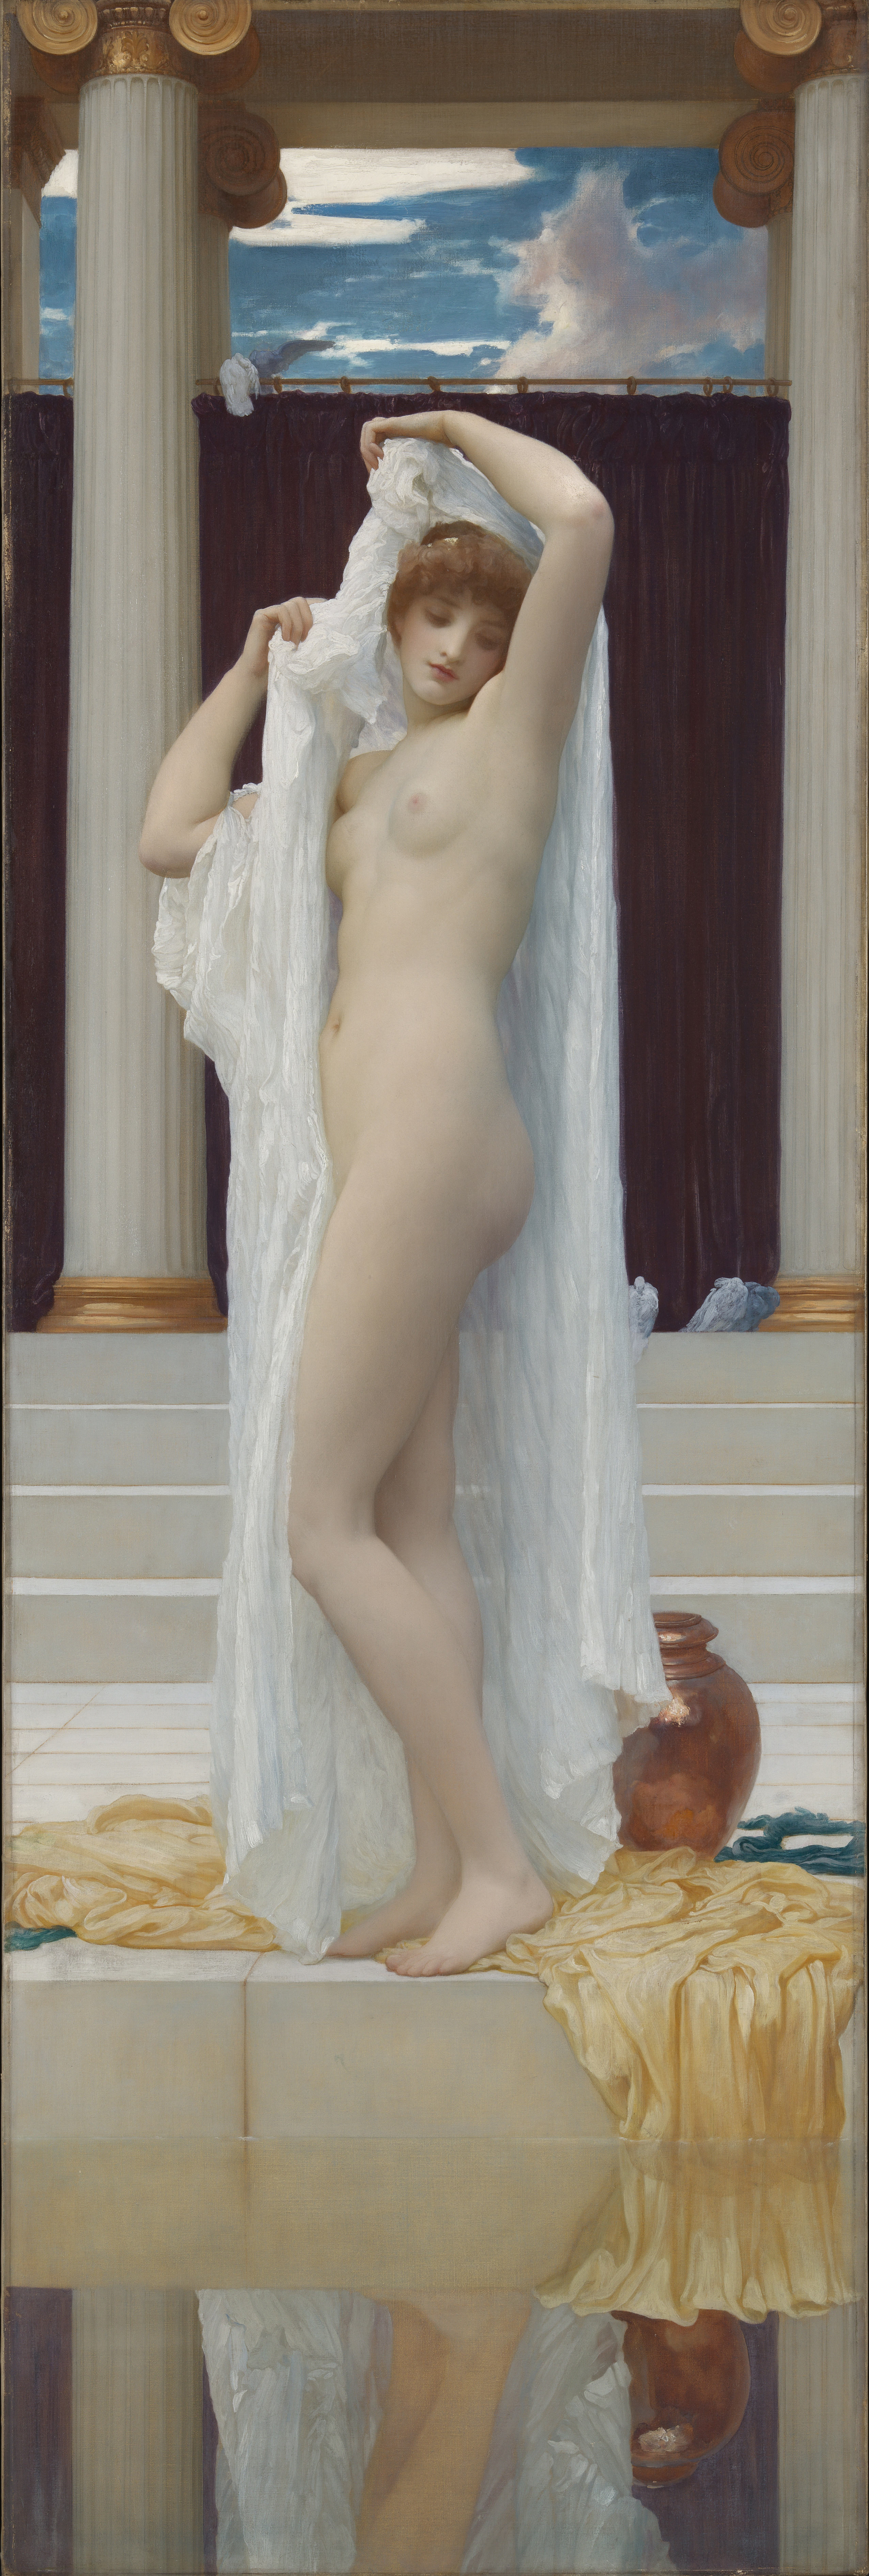 exhibited 1890, oil on canvas, 189.2 × 62.2 cm. Collection of Tate, London (N01574).